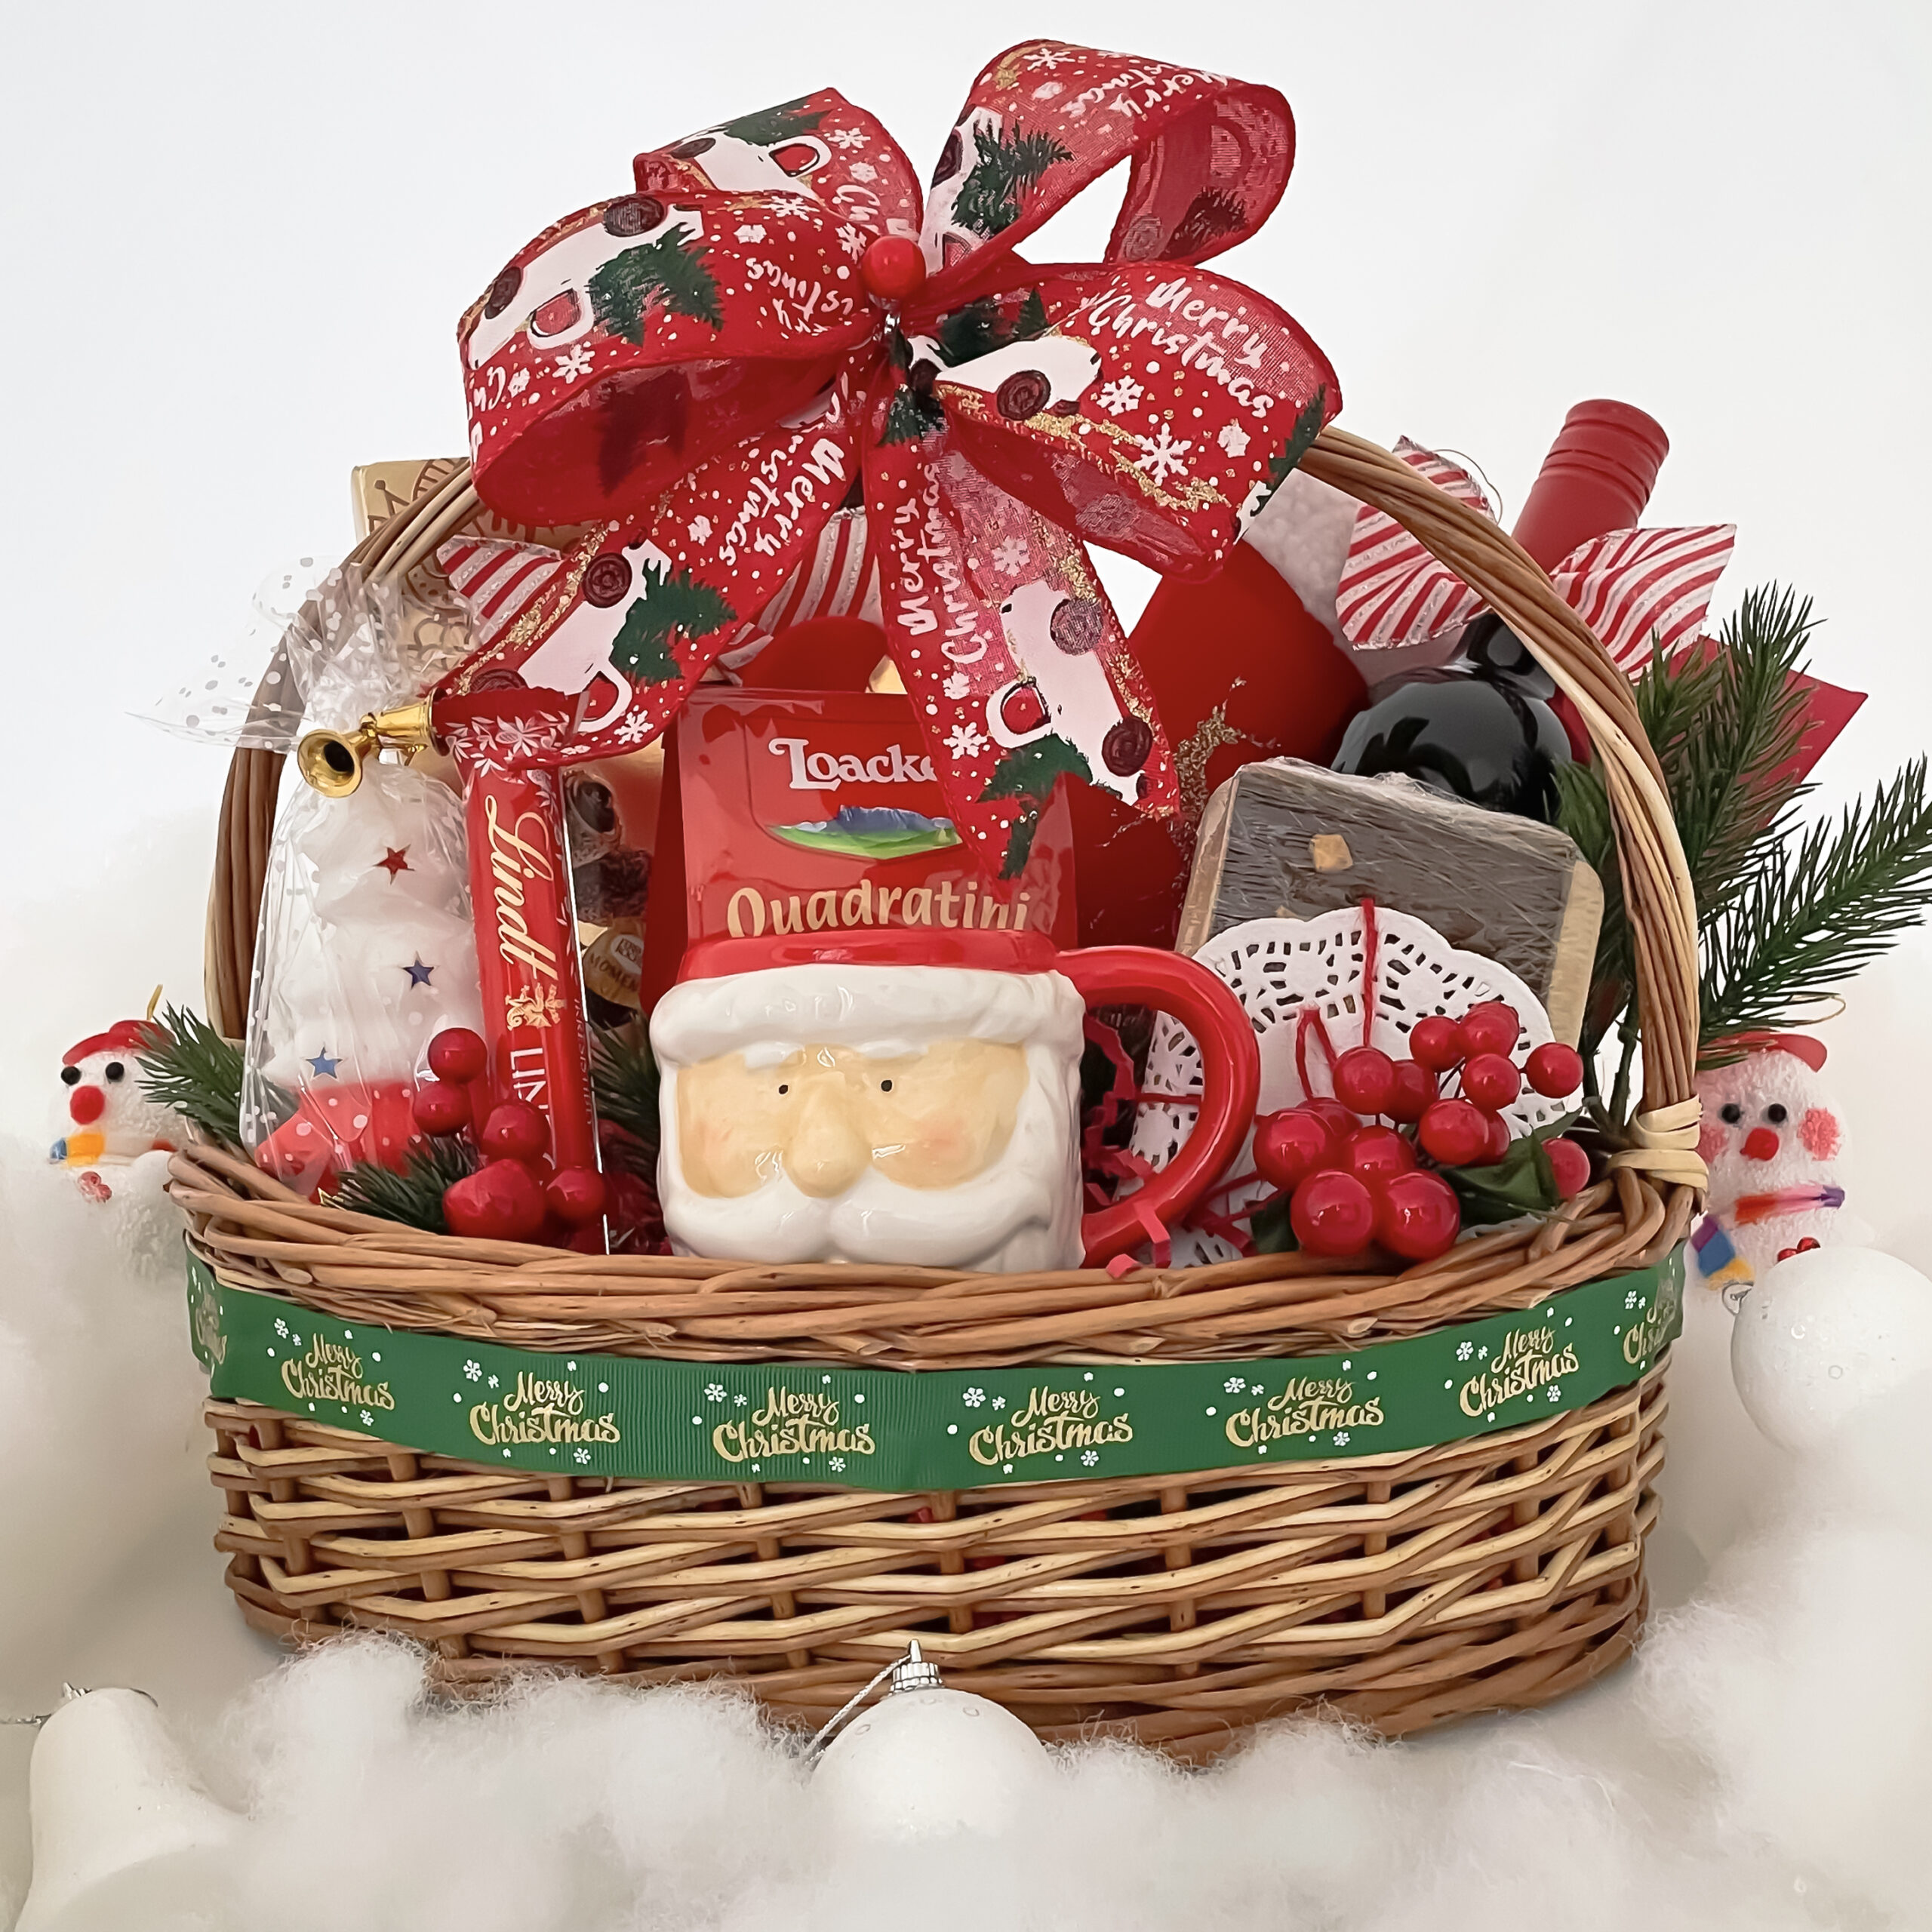 How to Pack and Choose Items for Holiday Gift Baskets